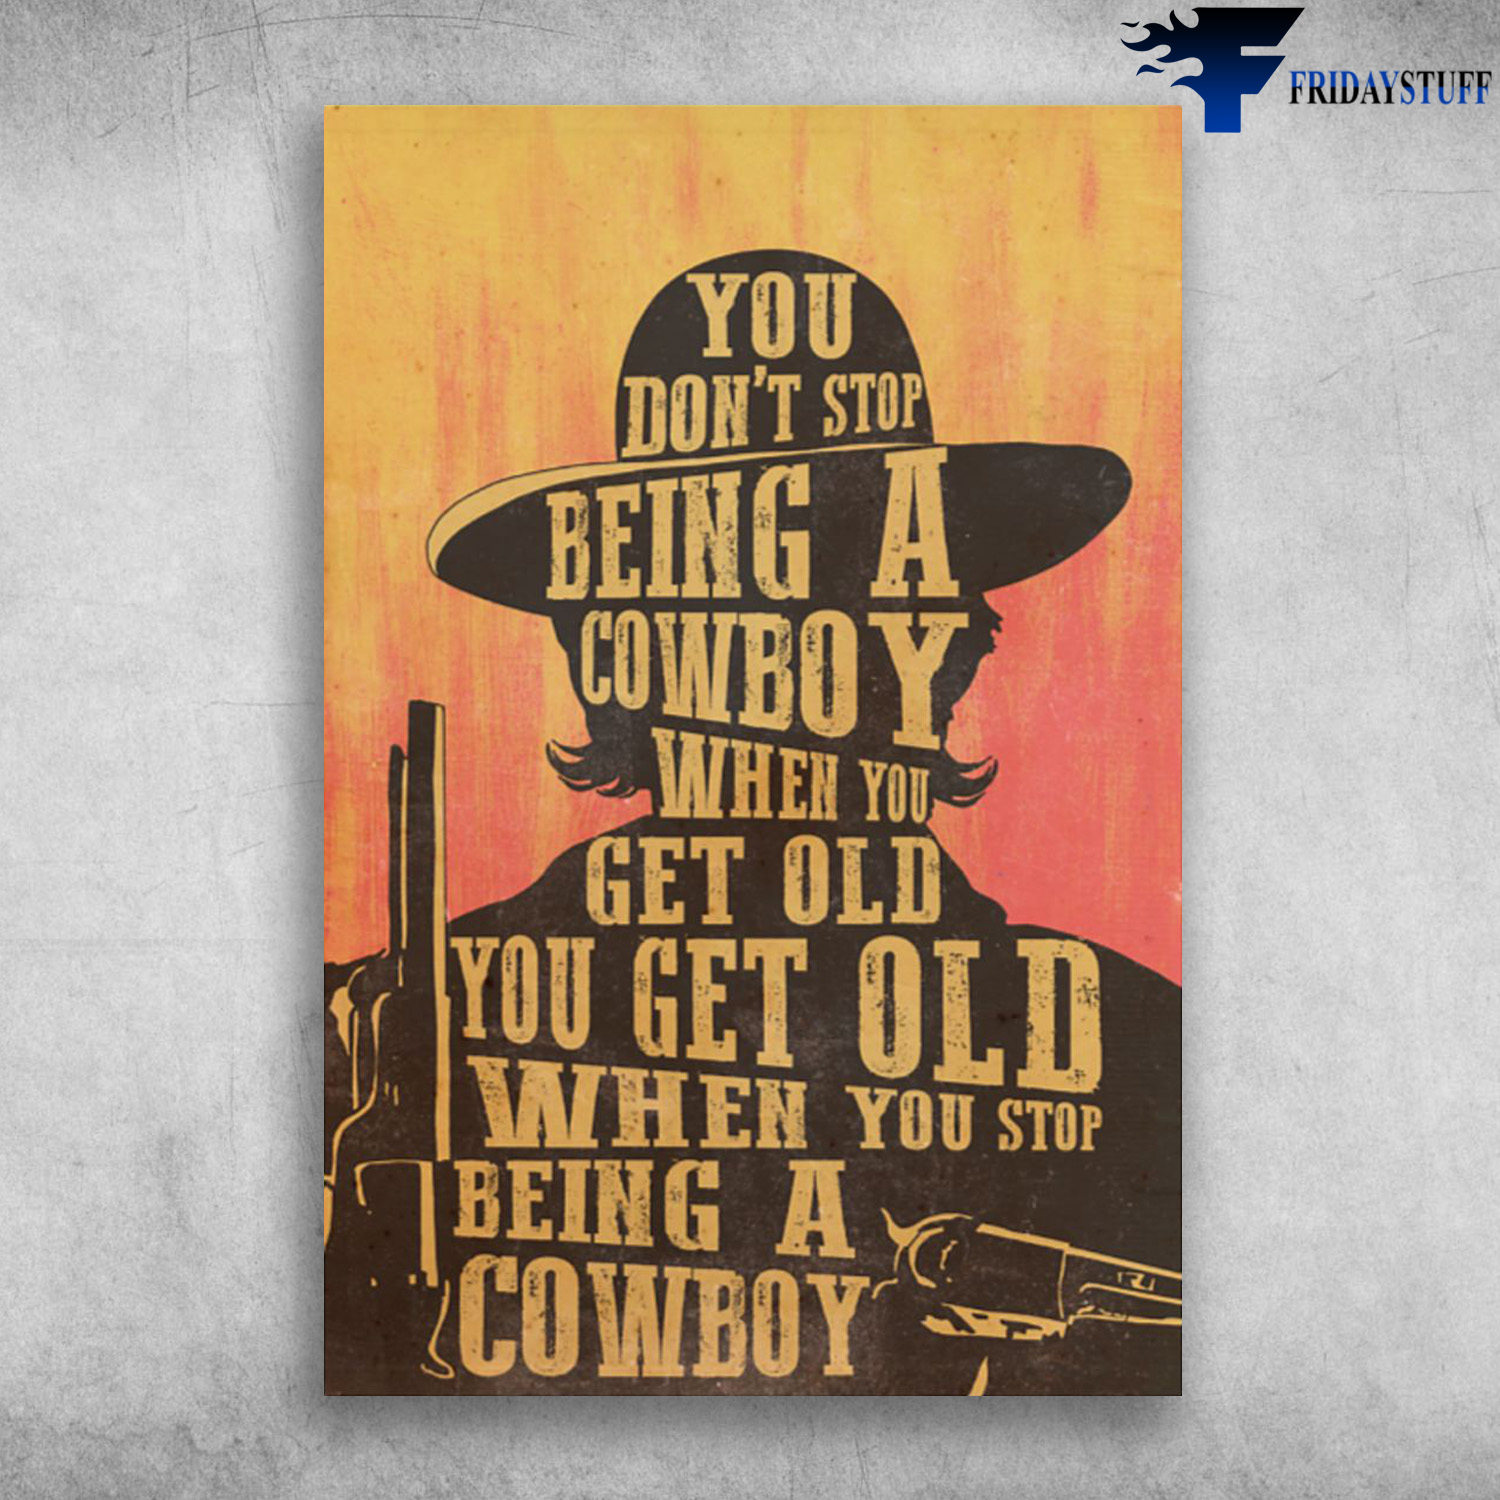 The Cowboy - You Don't Stop Being A Cowboy When You Get Old, You Get Old When You Stop Being A Cowboy